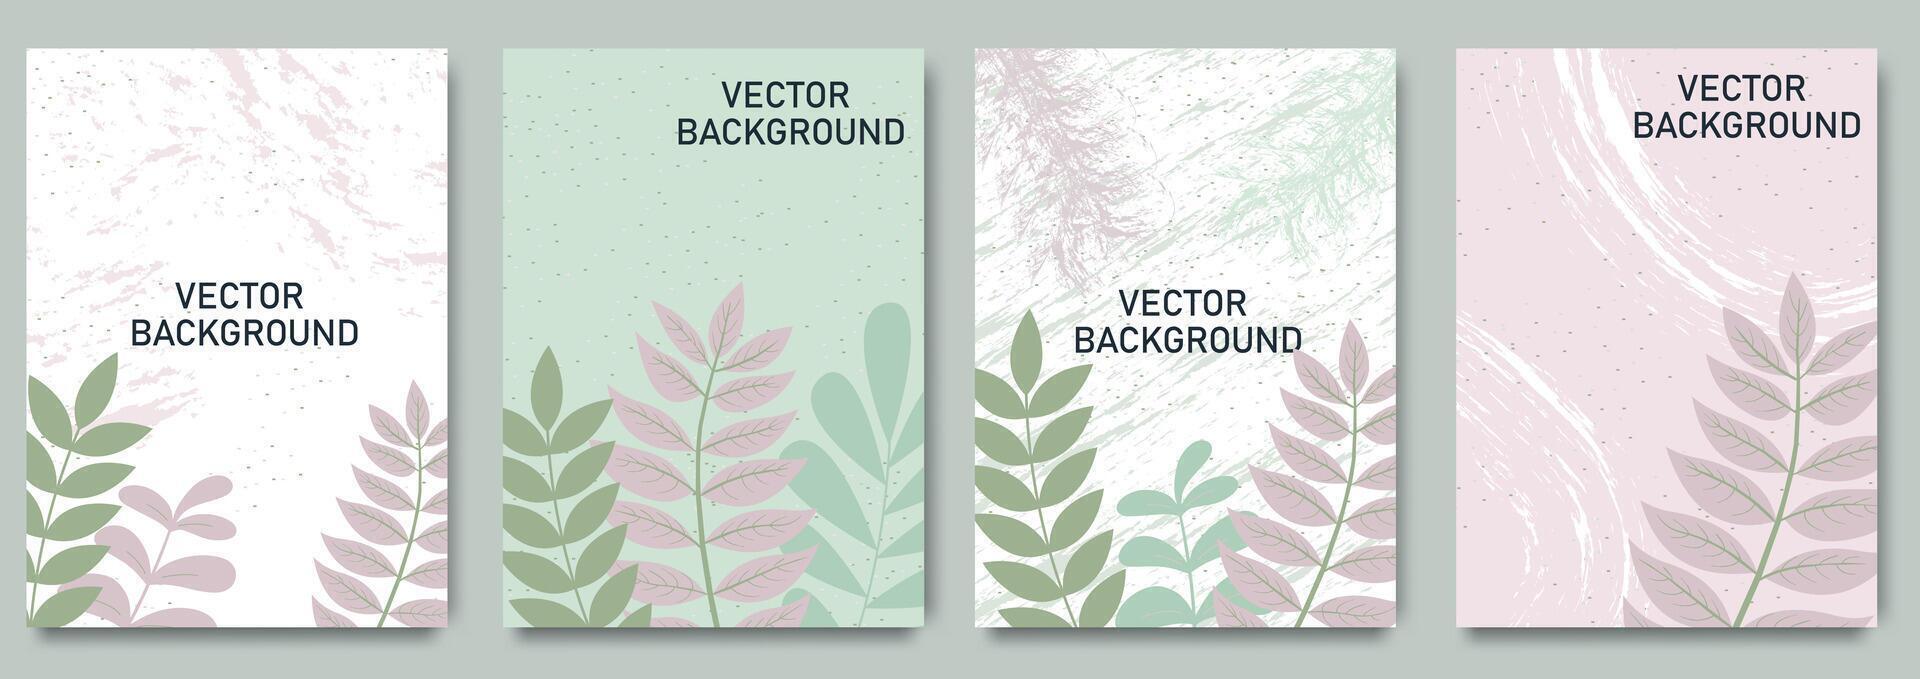 Neutral backgrounds floral elements with brush texture in pastel colors. Editable vector template for wedding, invitation, social media post, card, cover, poster, mobile apps, web ads